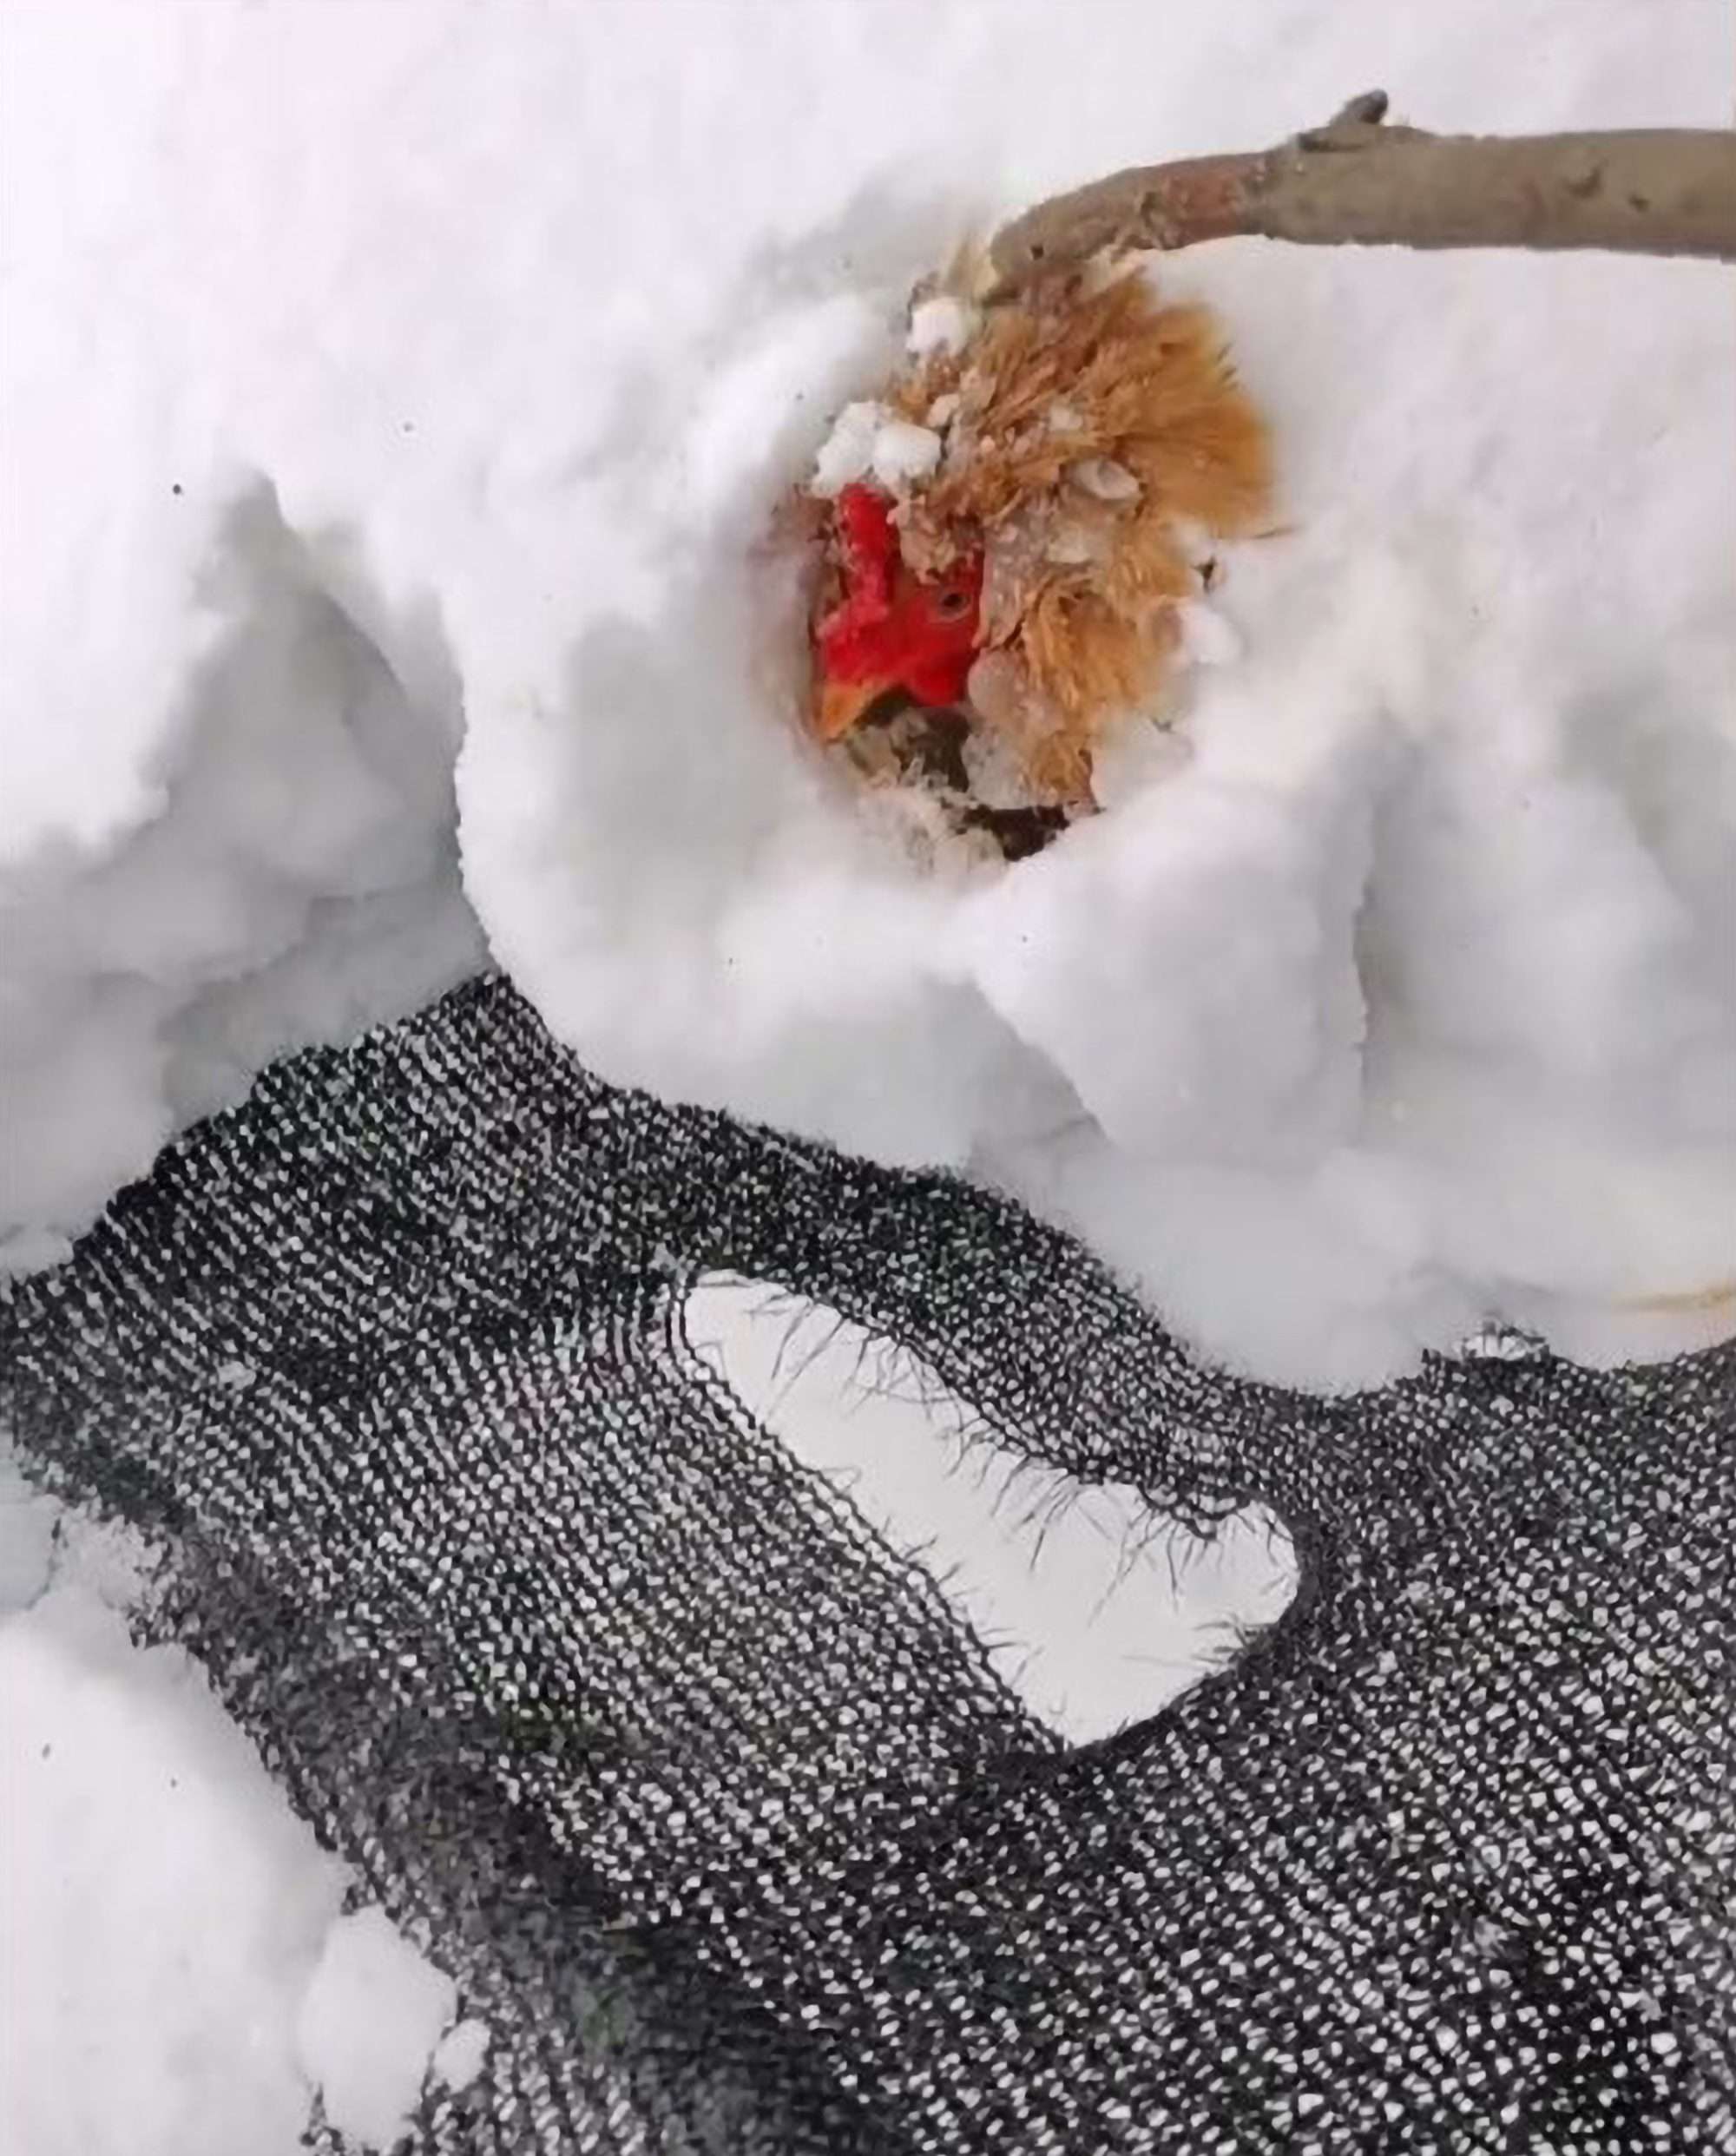 Read more about the article Chicken Incredibly Survives Being Buried Under Snowdrift For Days